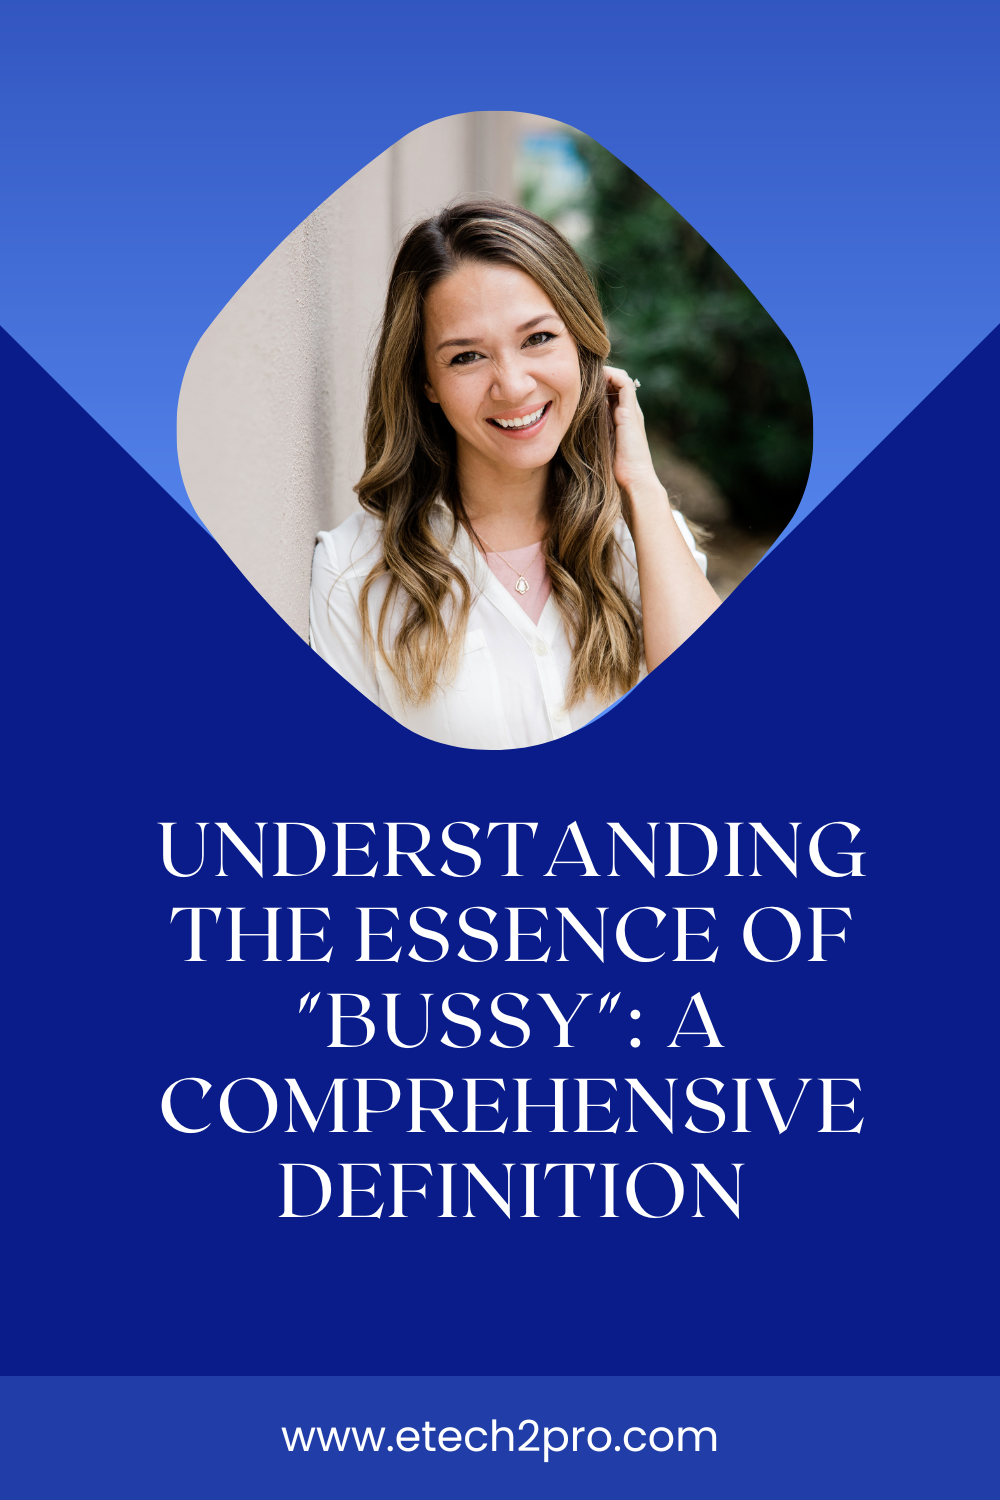 Understanding the Essence of "Bussy": A Comprehensive Definition